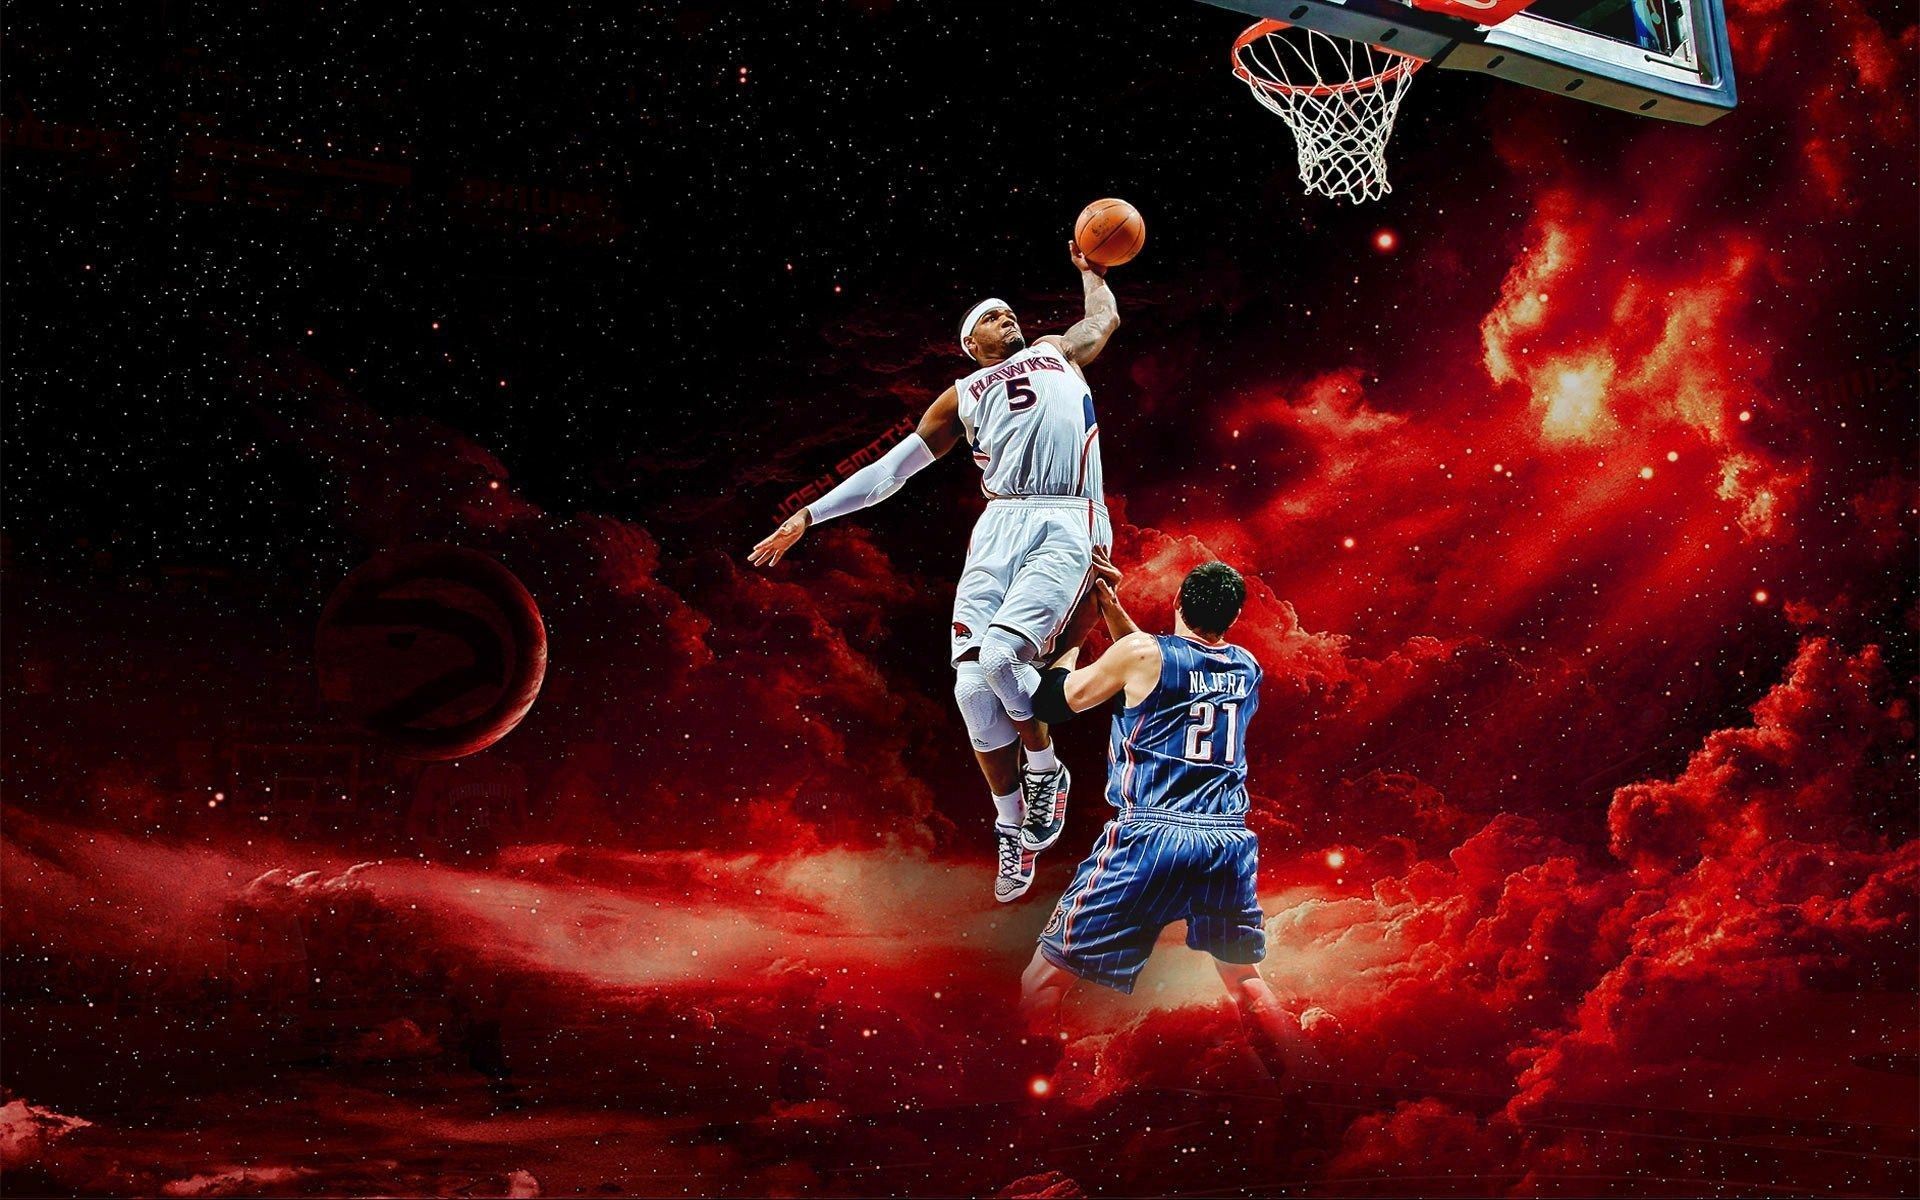 Cool Basketball Wallpapers by Nguyen Tien Dat